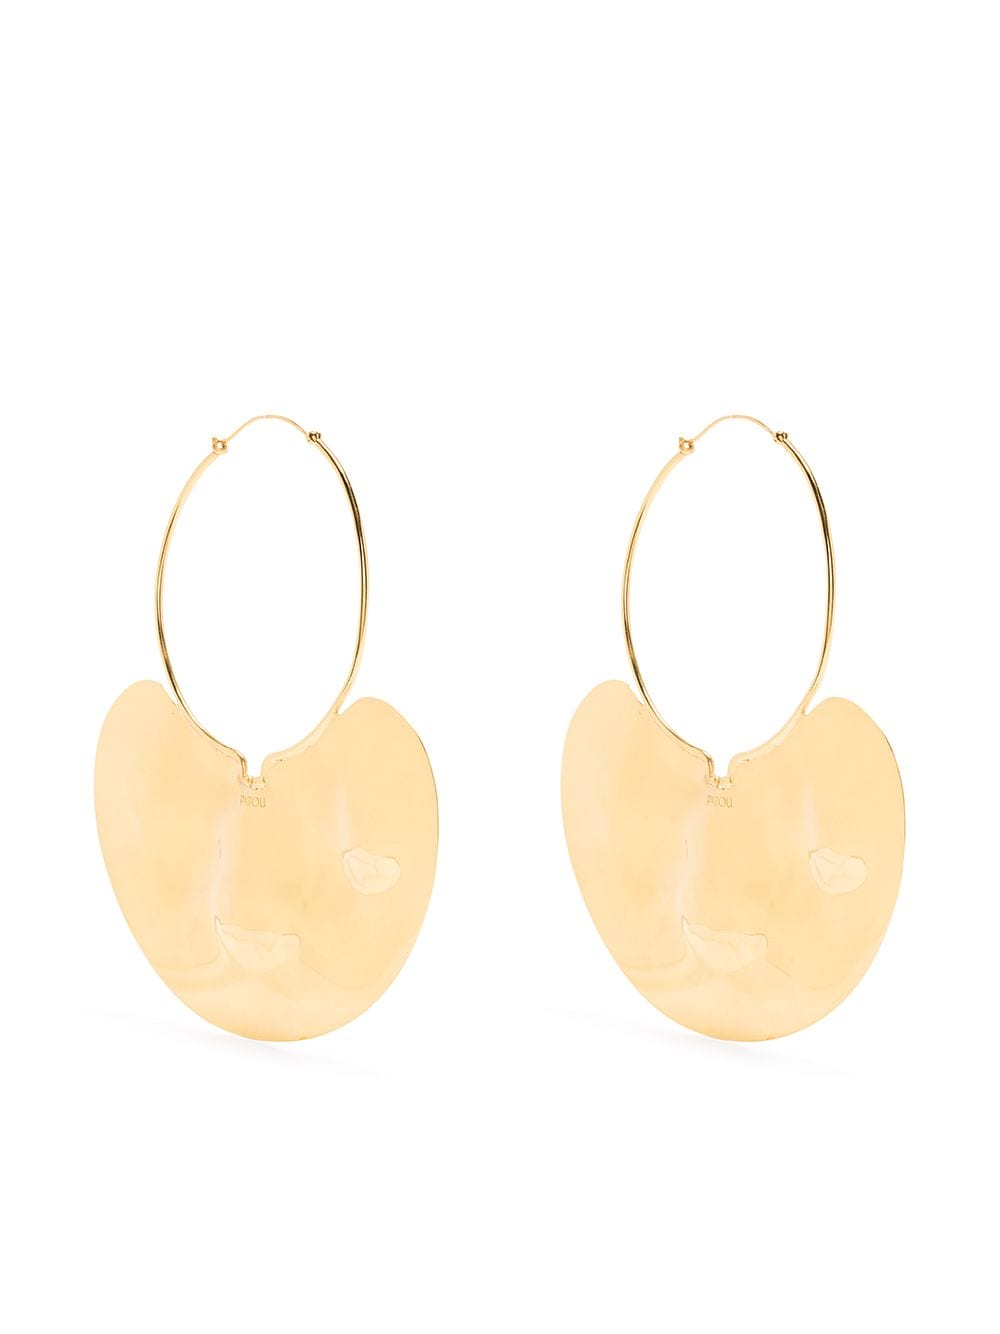 Patou large hammered hoop earrings - Gold von Patou